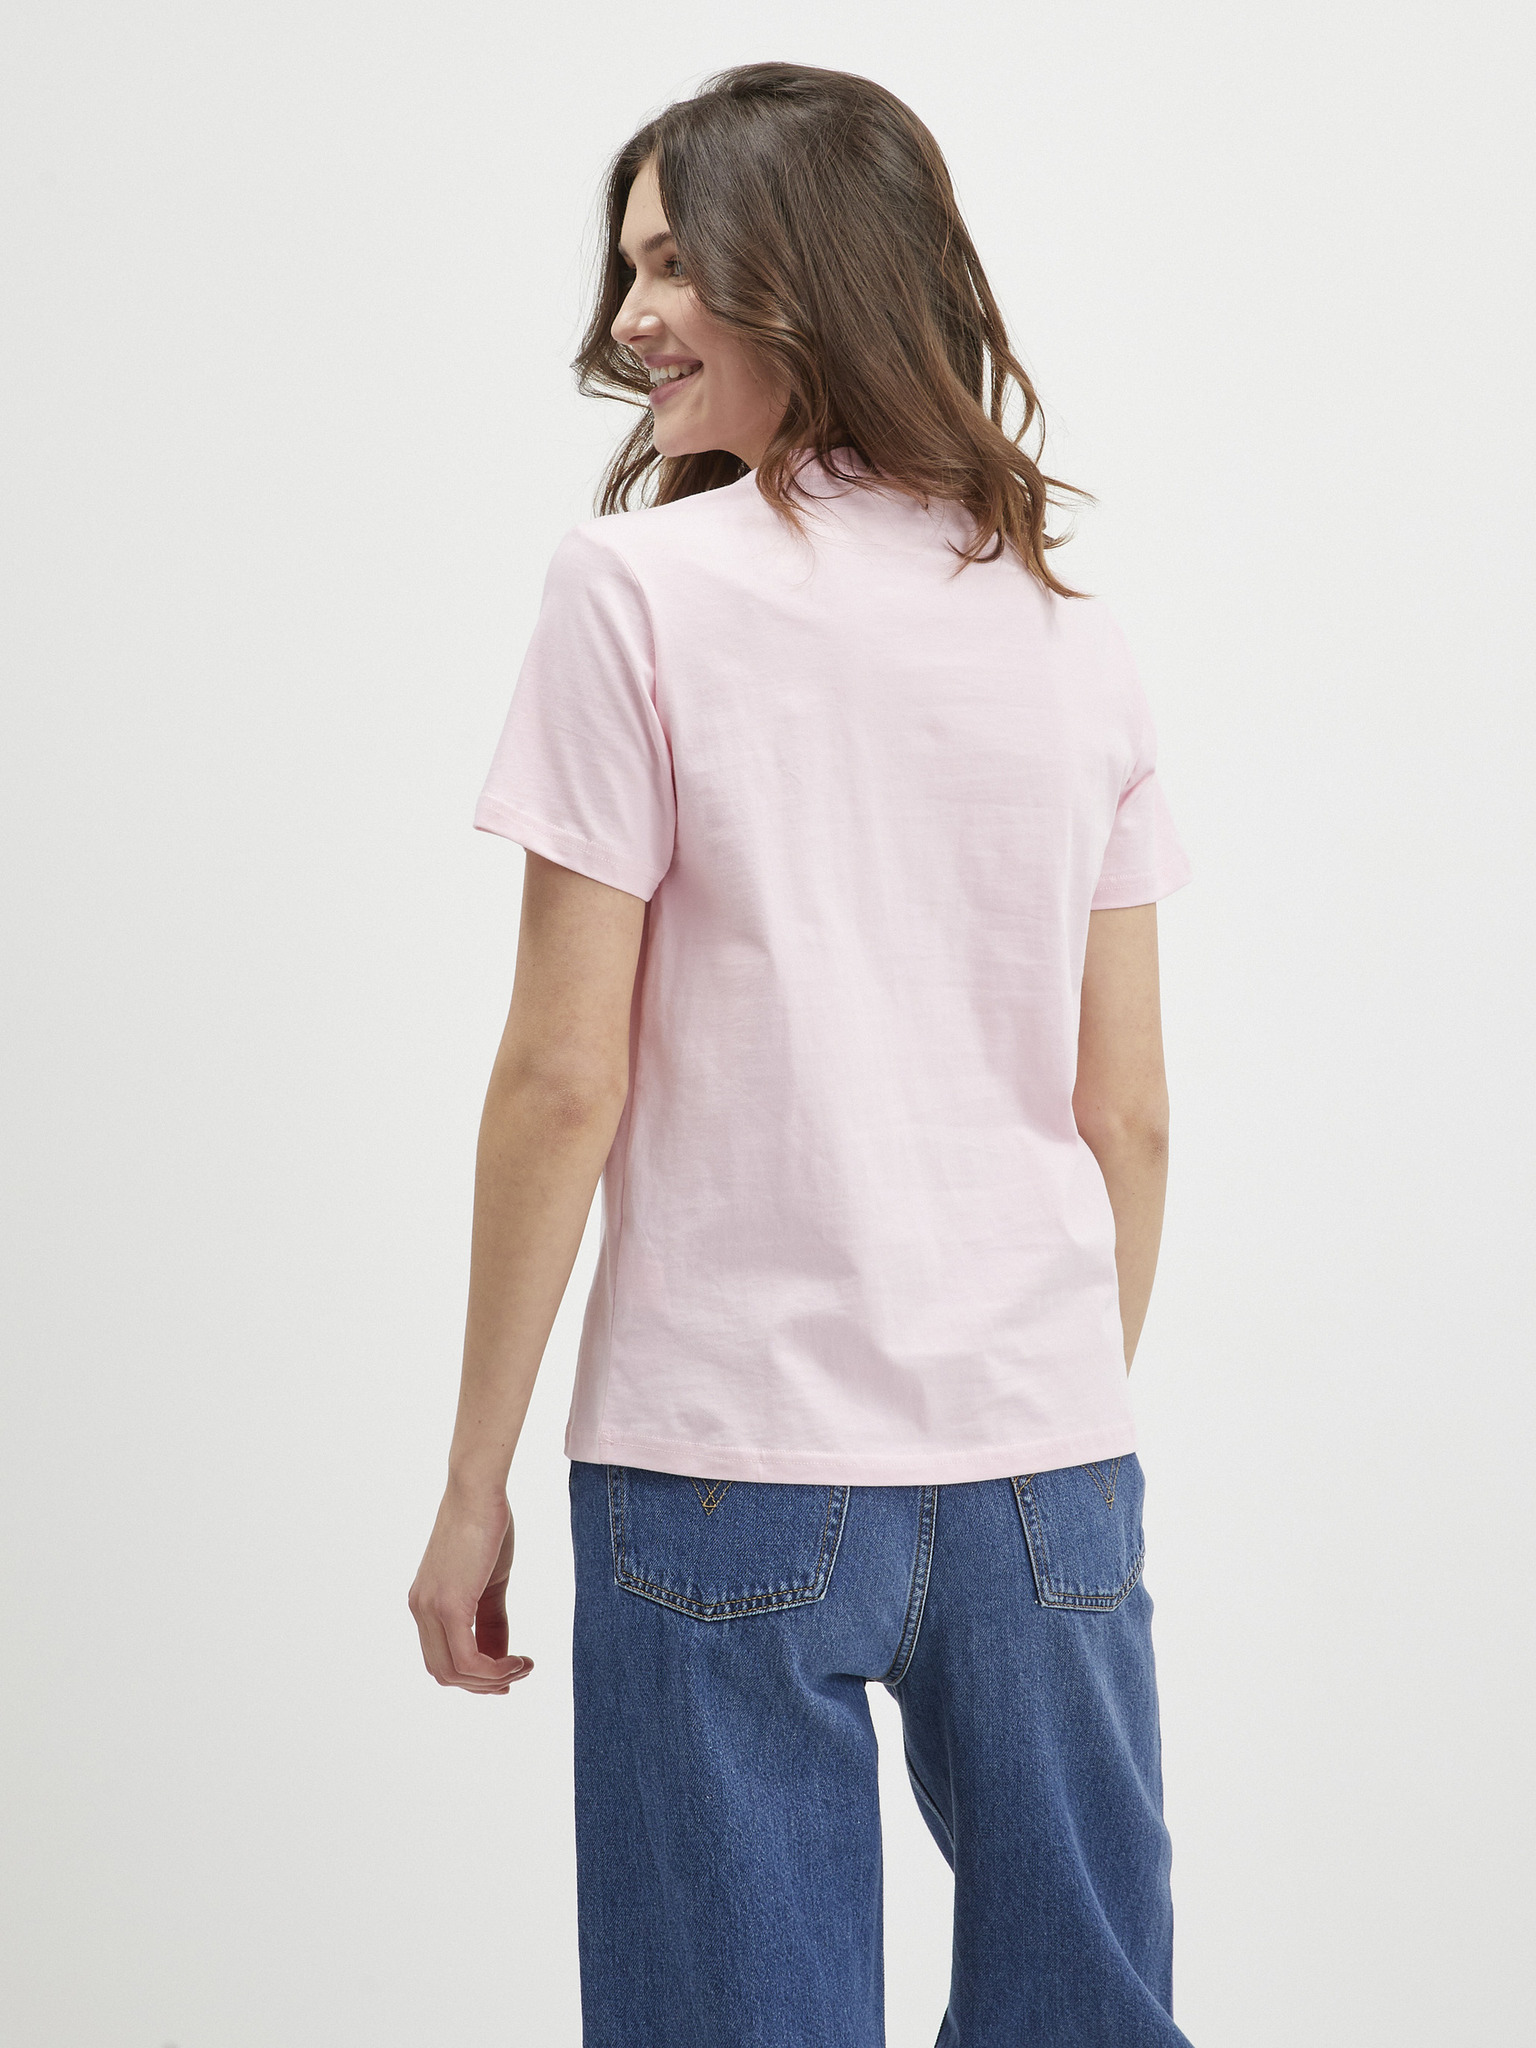 Update more than 124 new look pink denim shirt latest